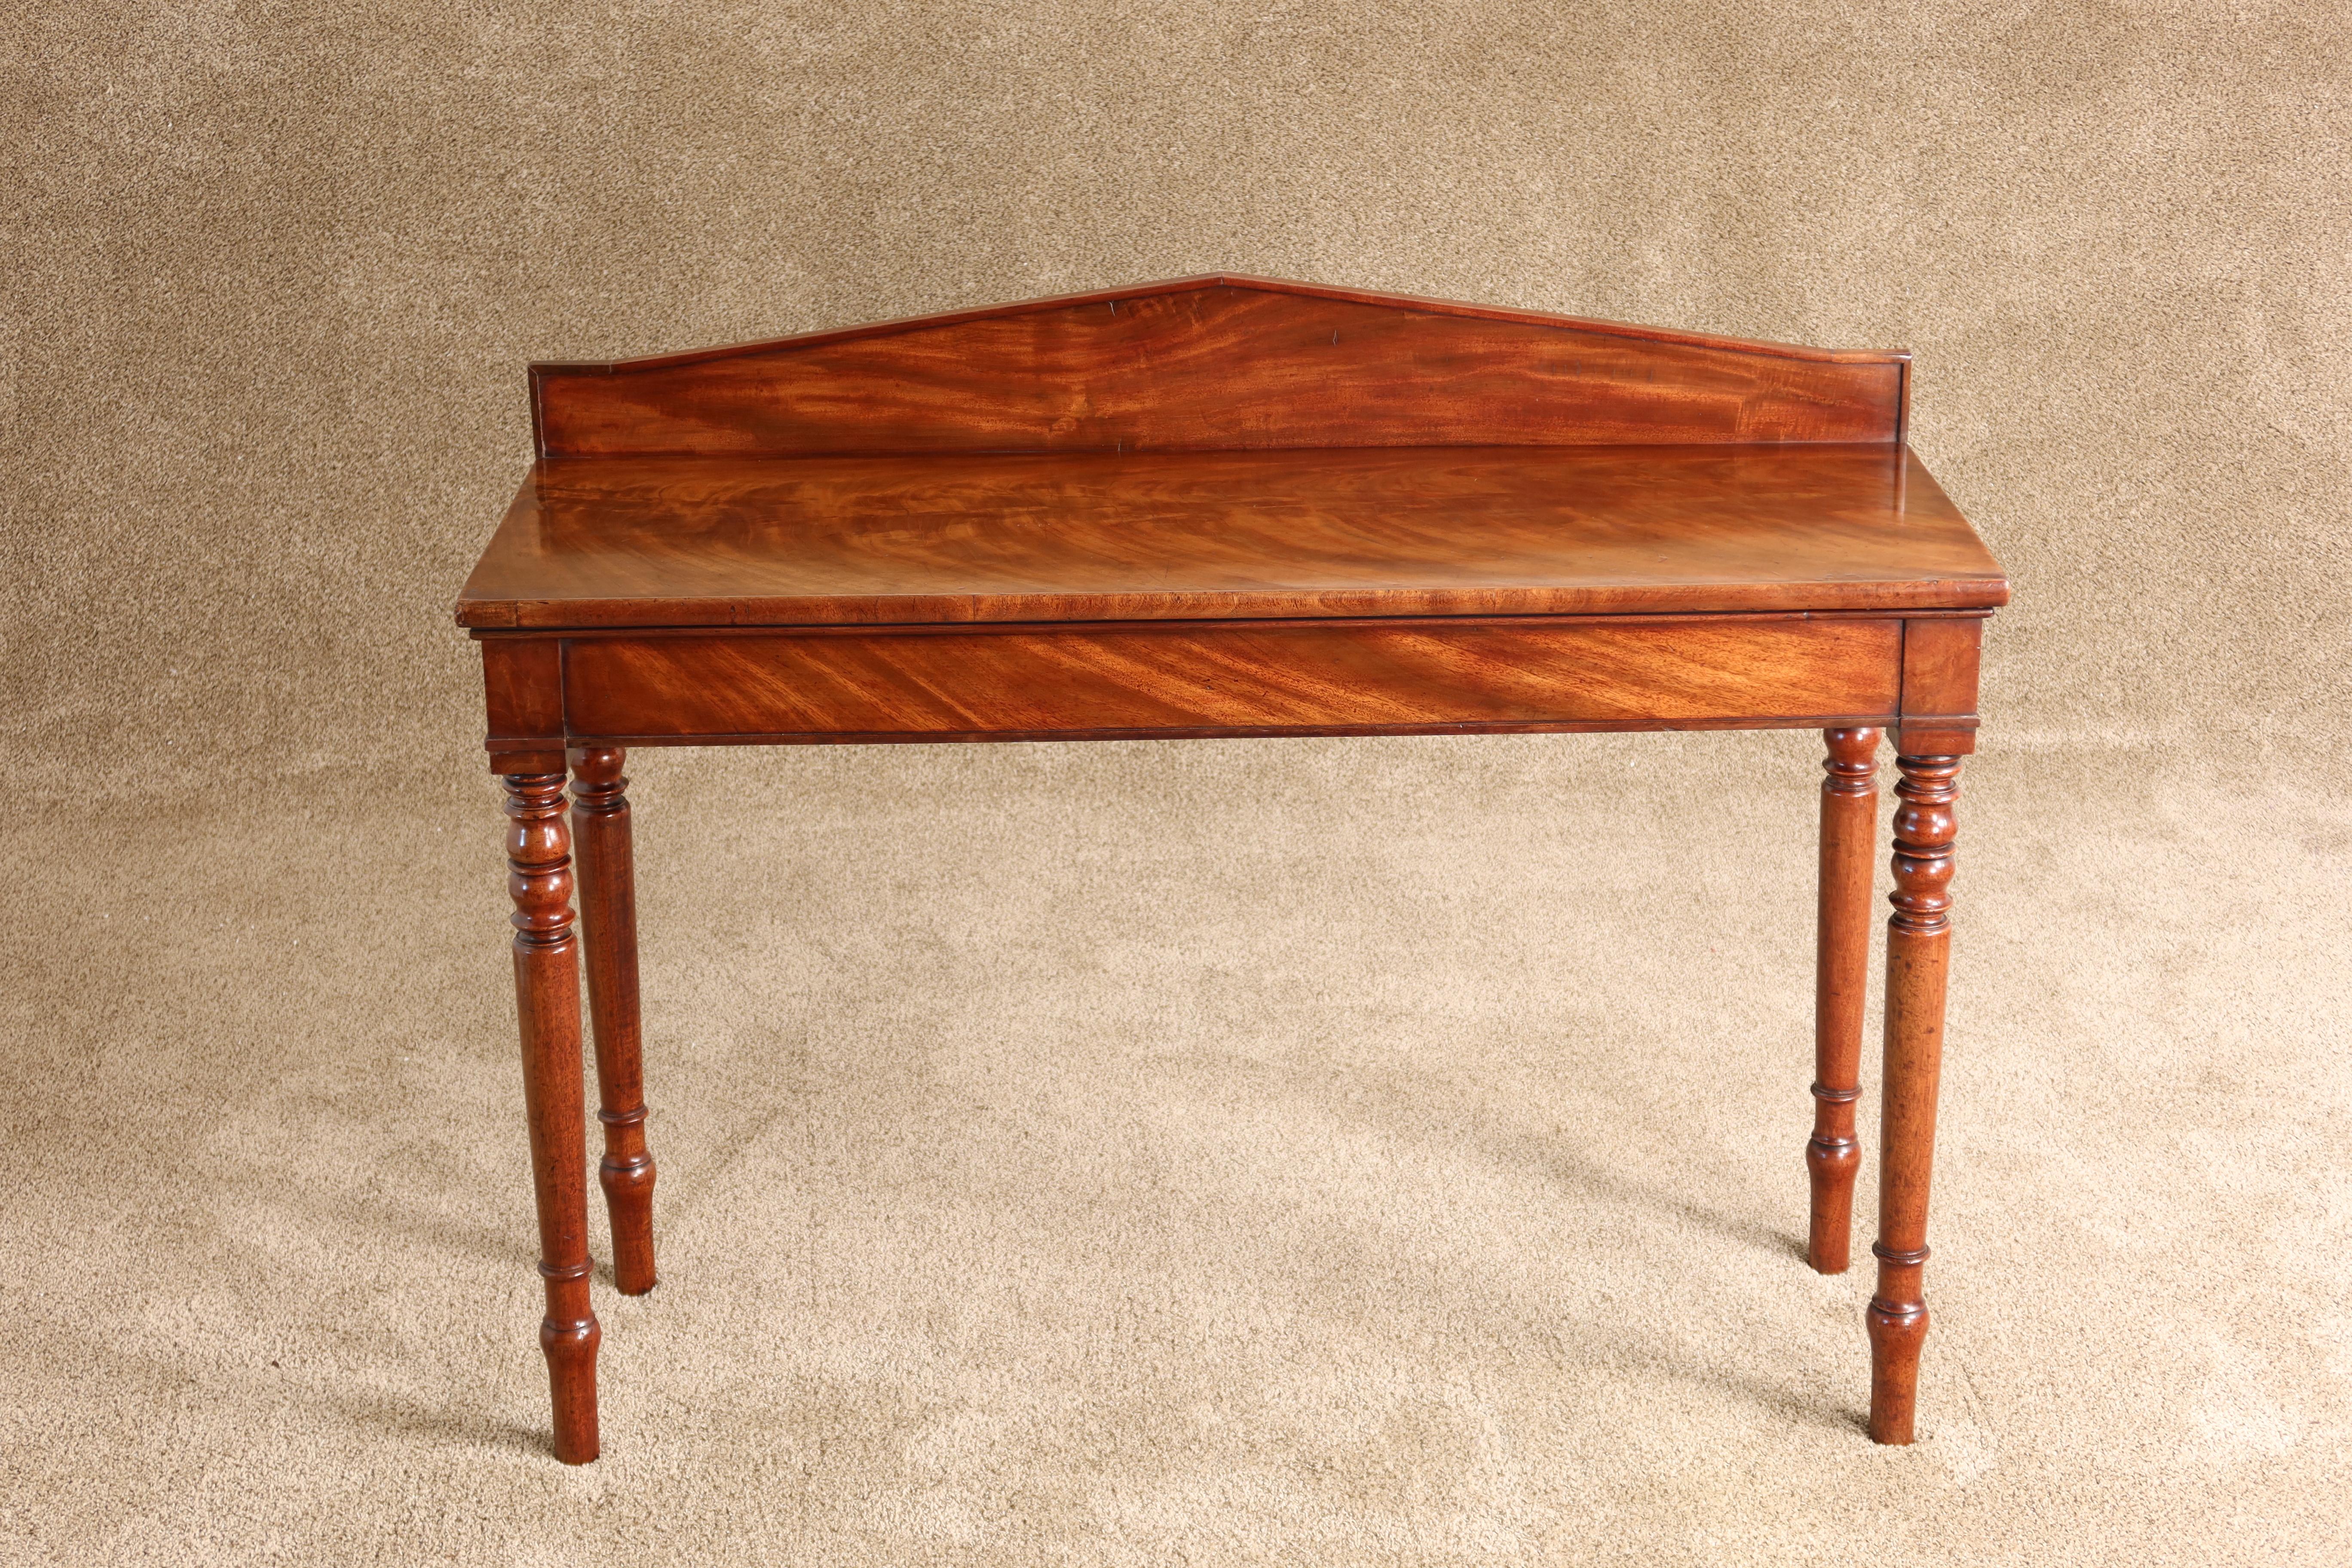 Early 19th Century English Regency Period Faded Mahogany Console Table with Gallery, circa 1825